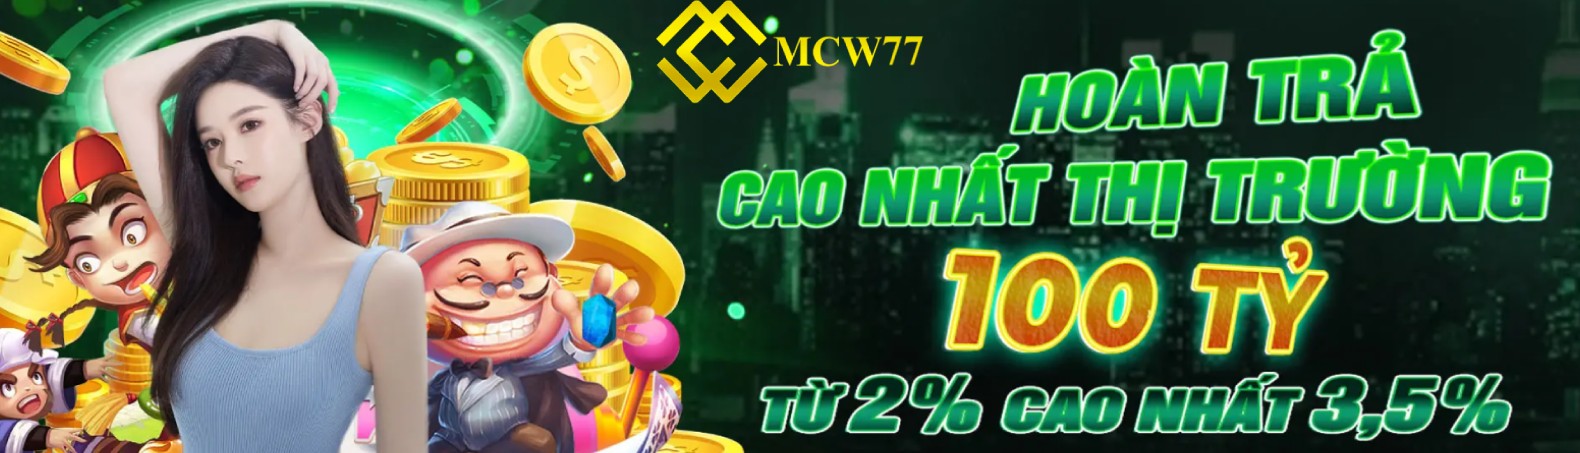 mcw77 banner